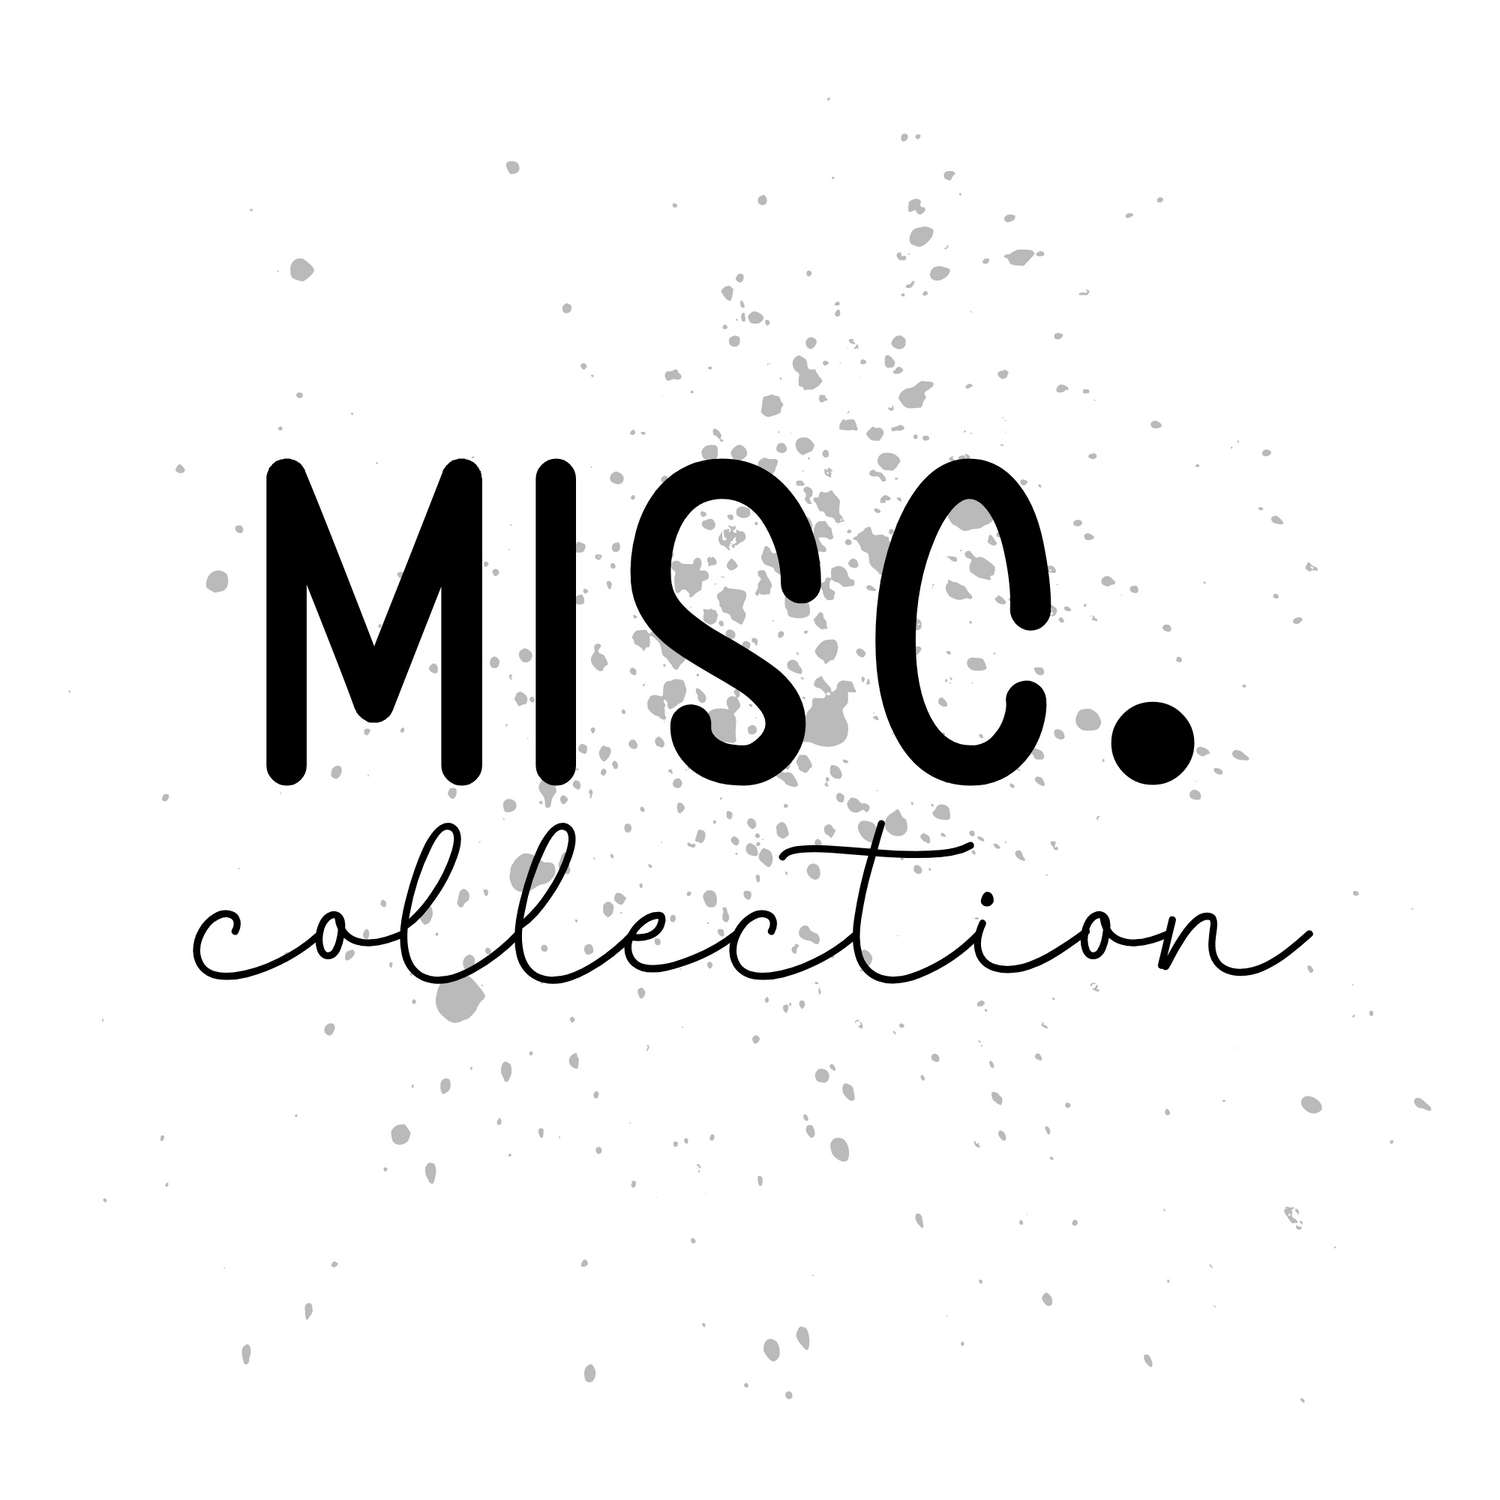 MISC. COLLECTION